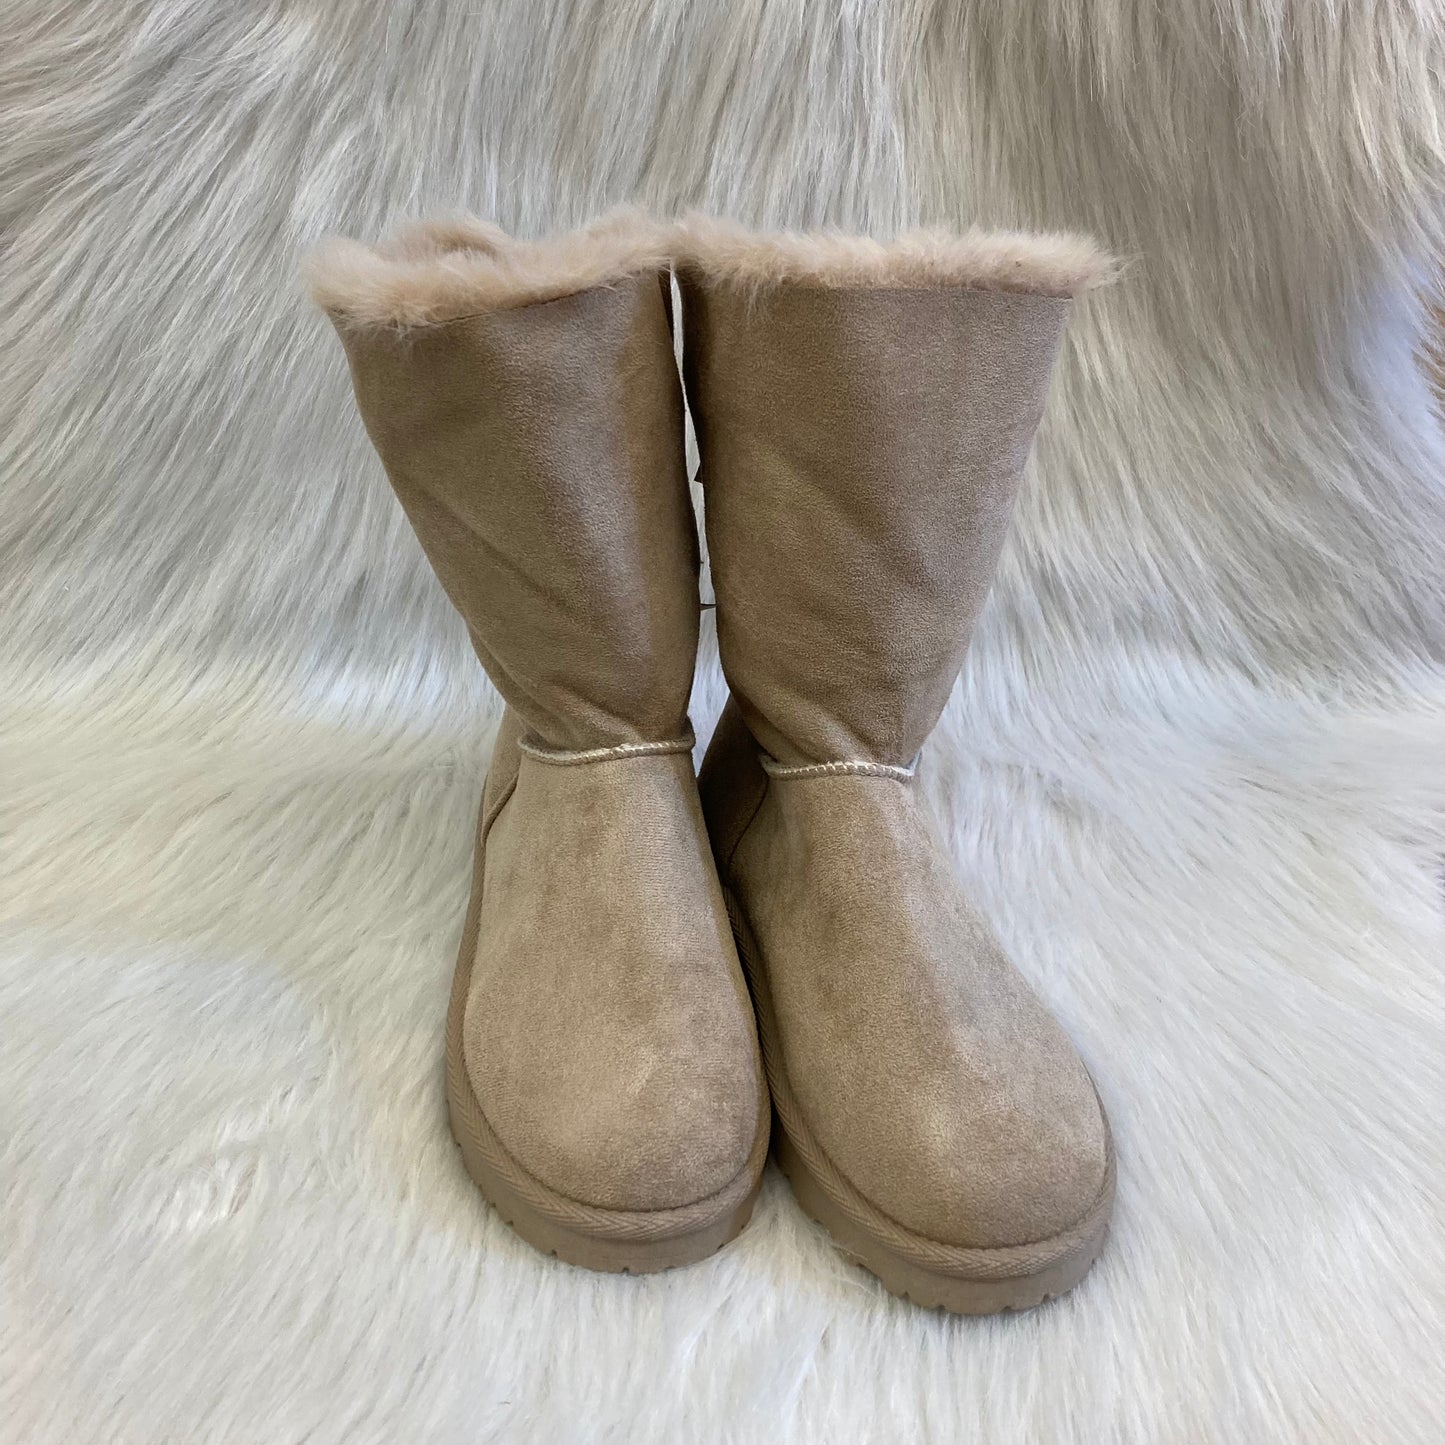 Beige fur-lined suede ankle boot